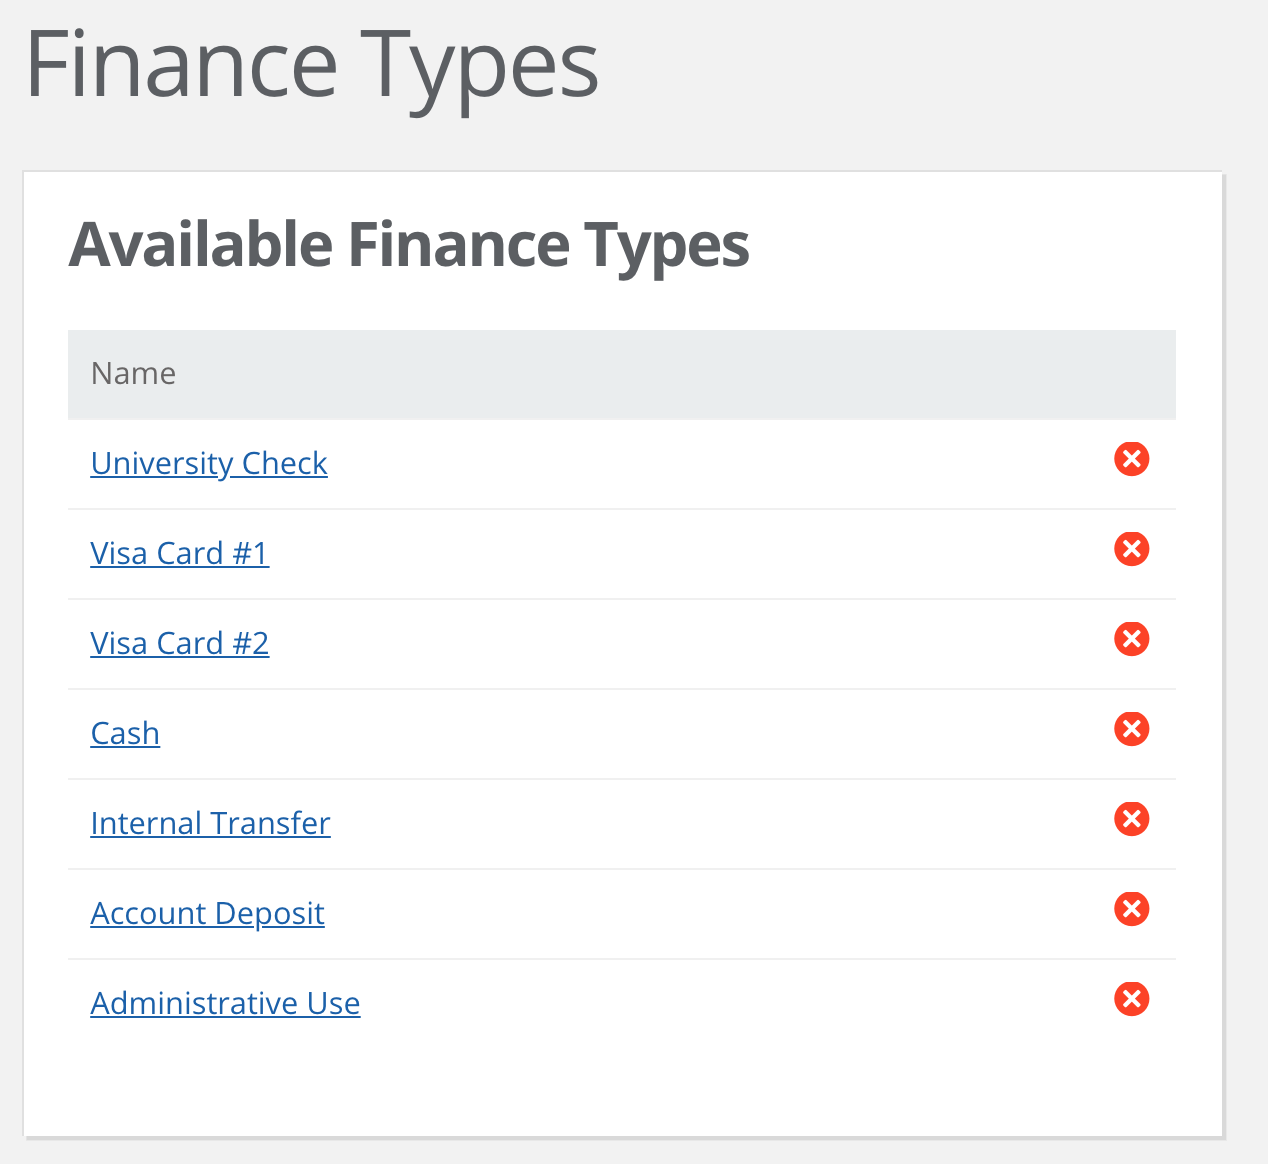 The image shows example Finance Types, such as card, check, or cash.